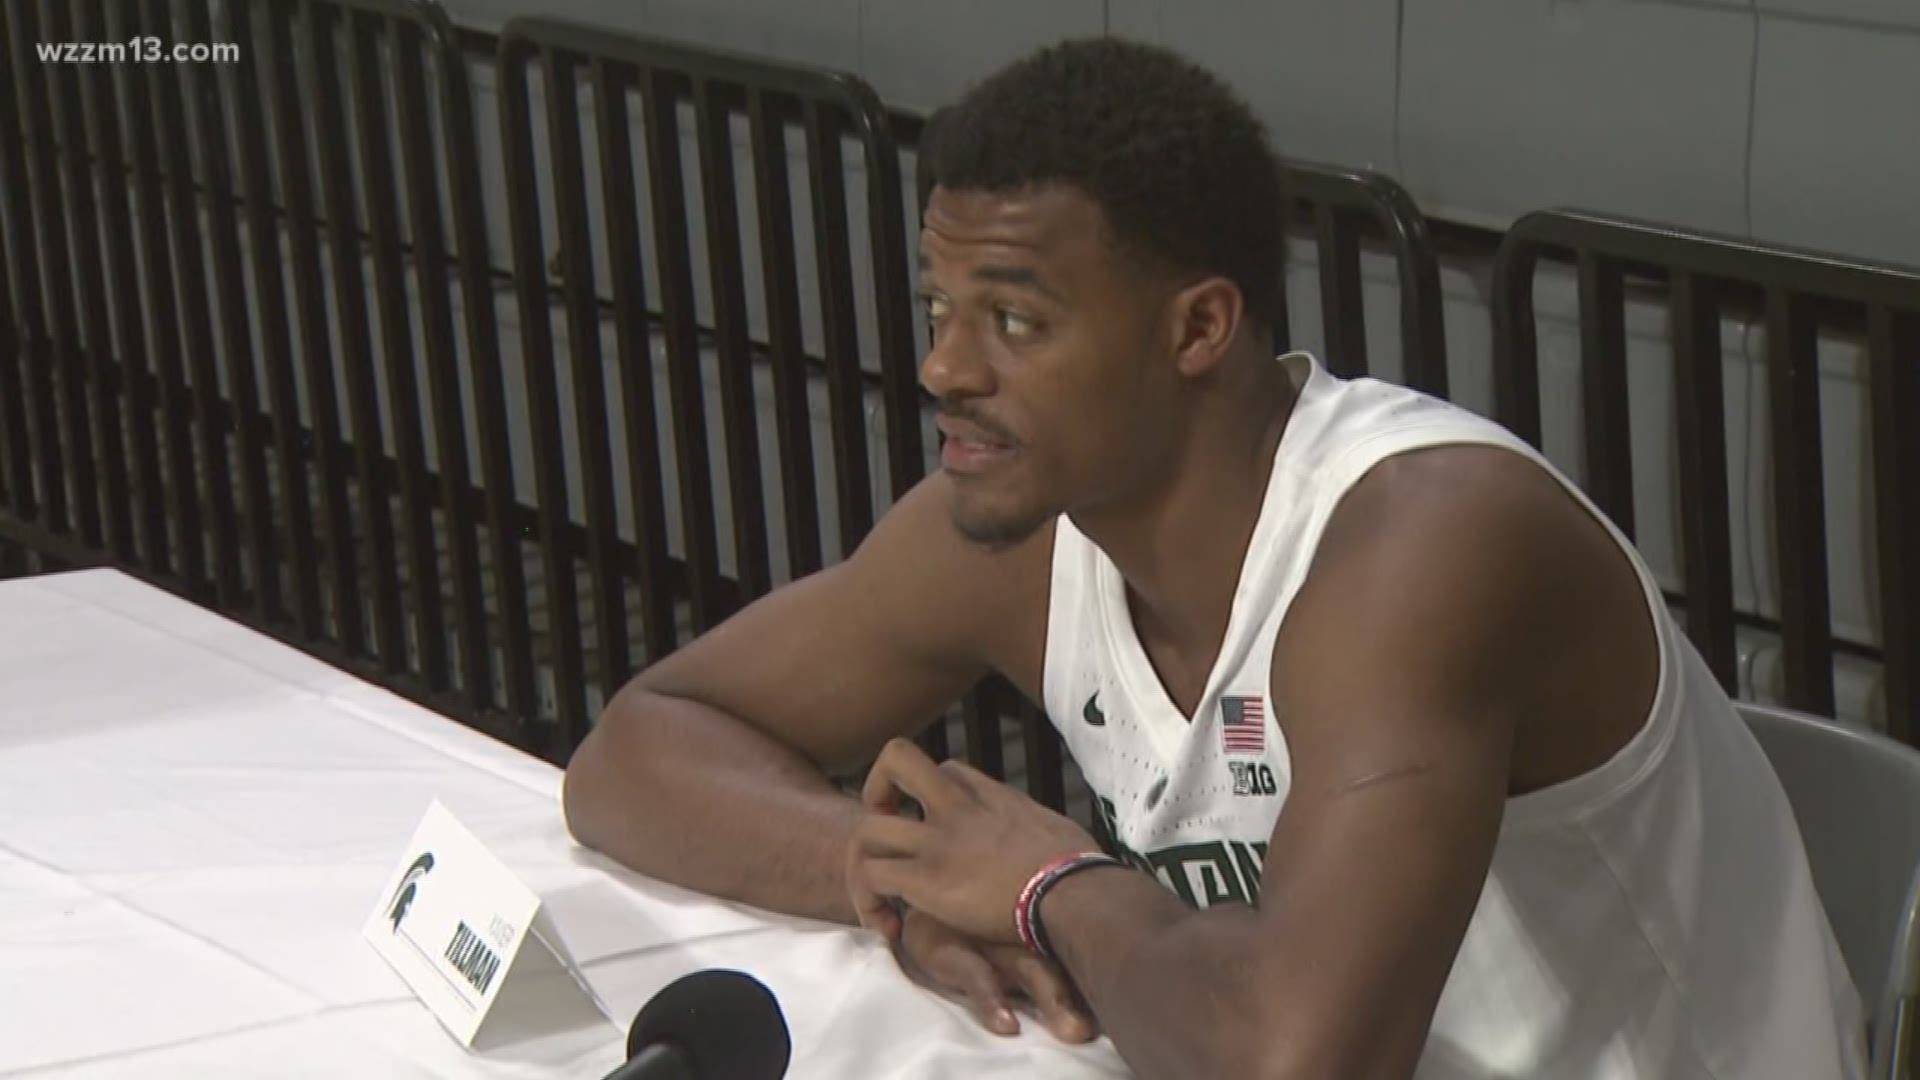 MSU enjoys budding talent in front court